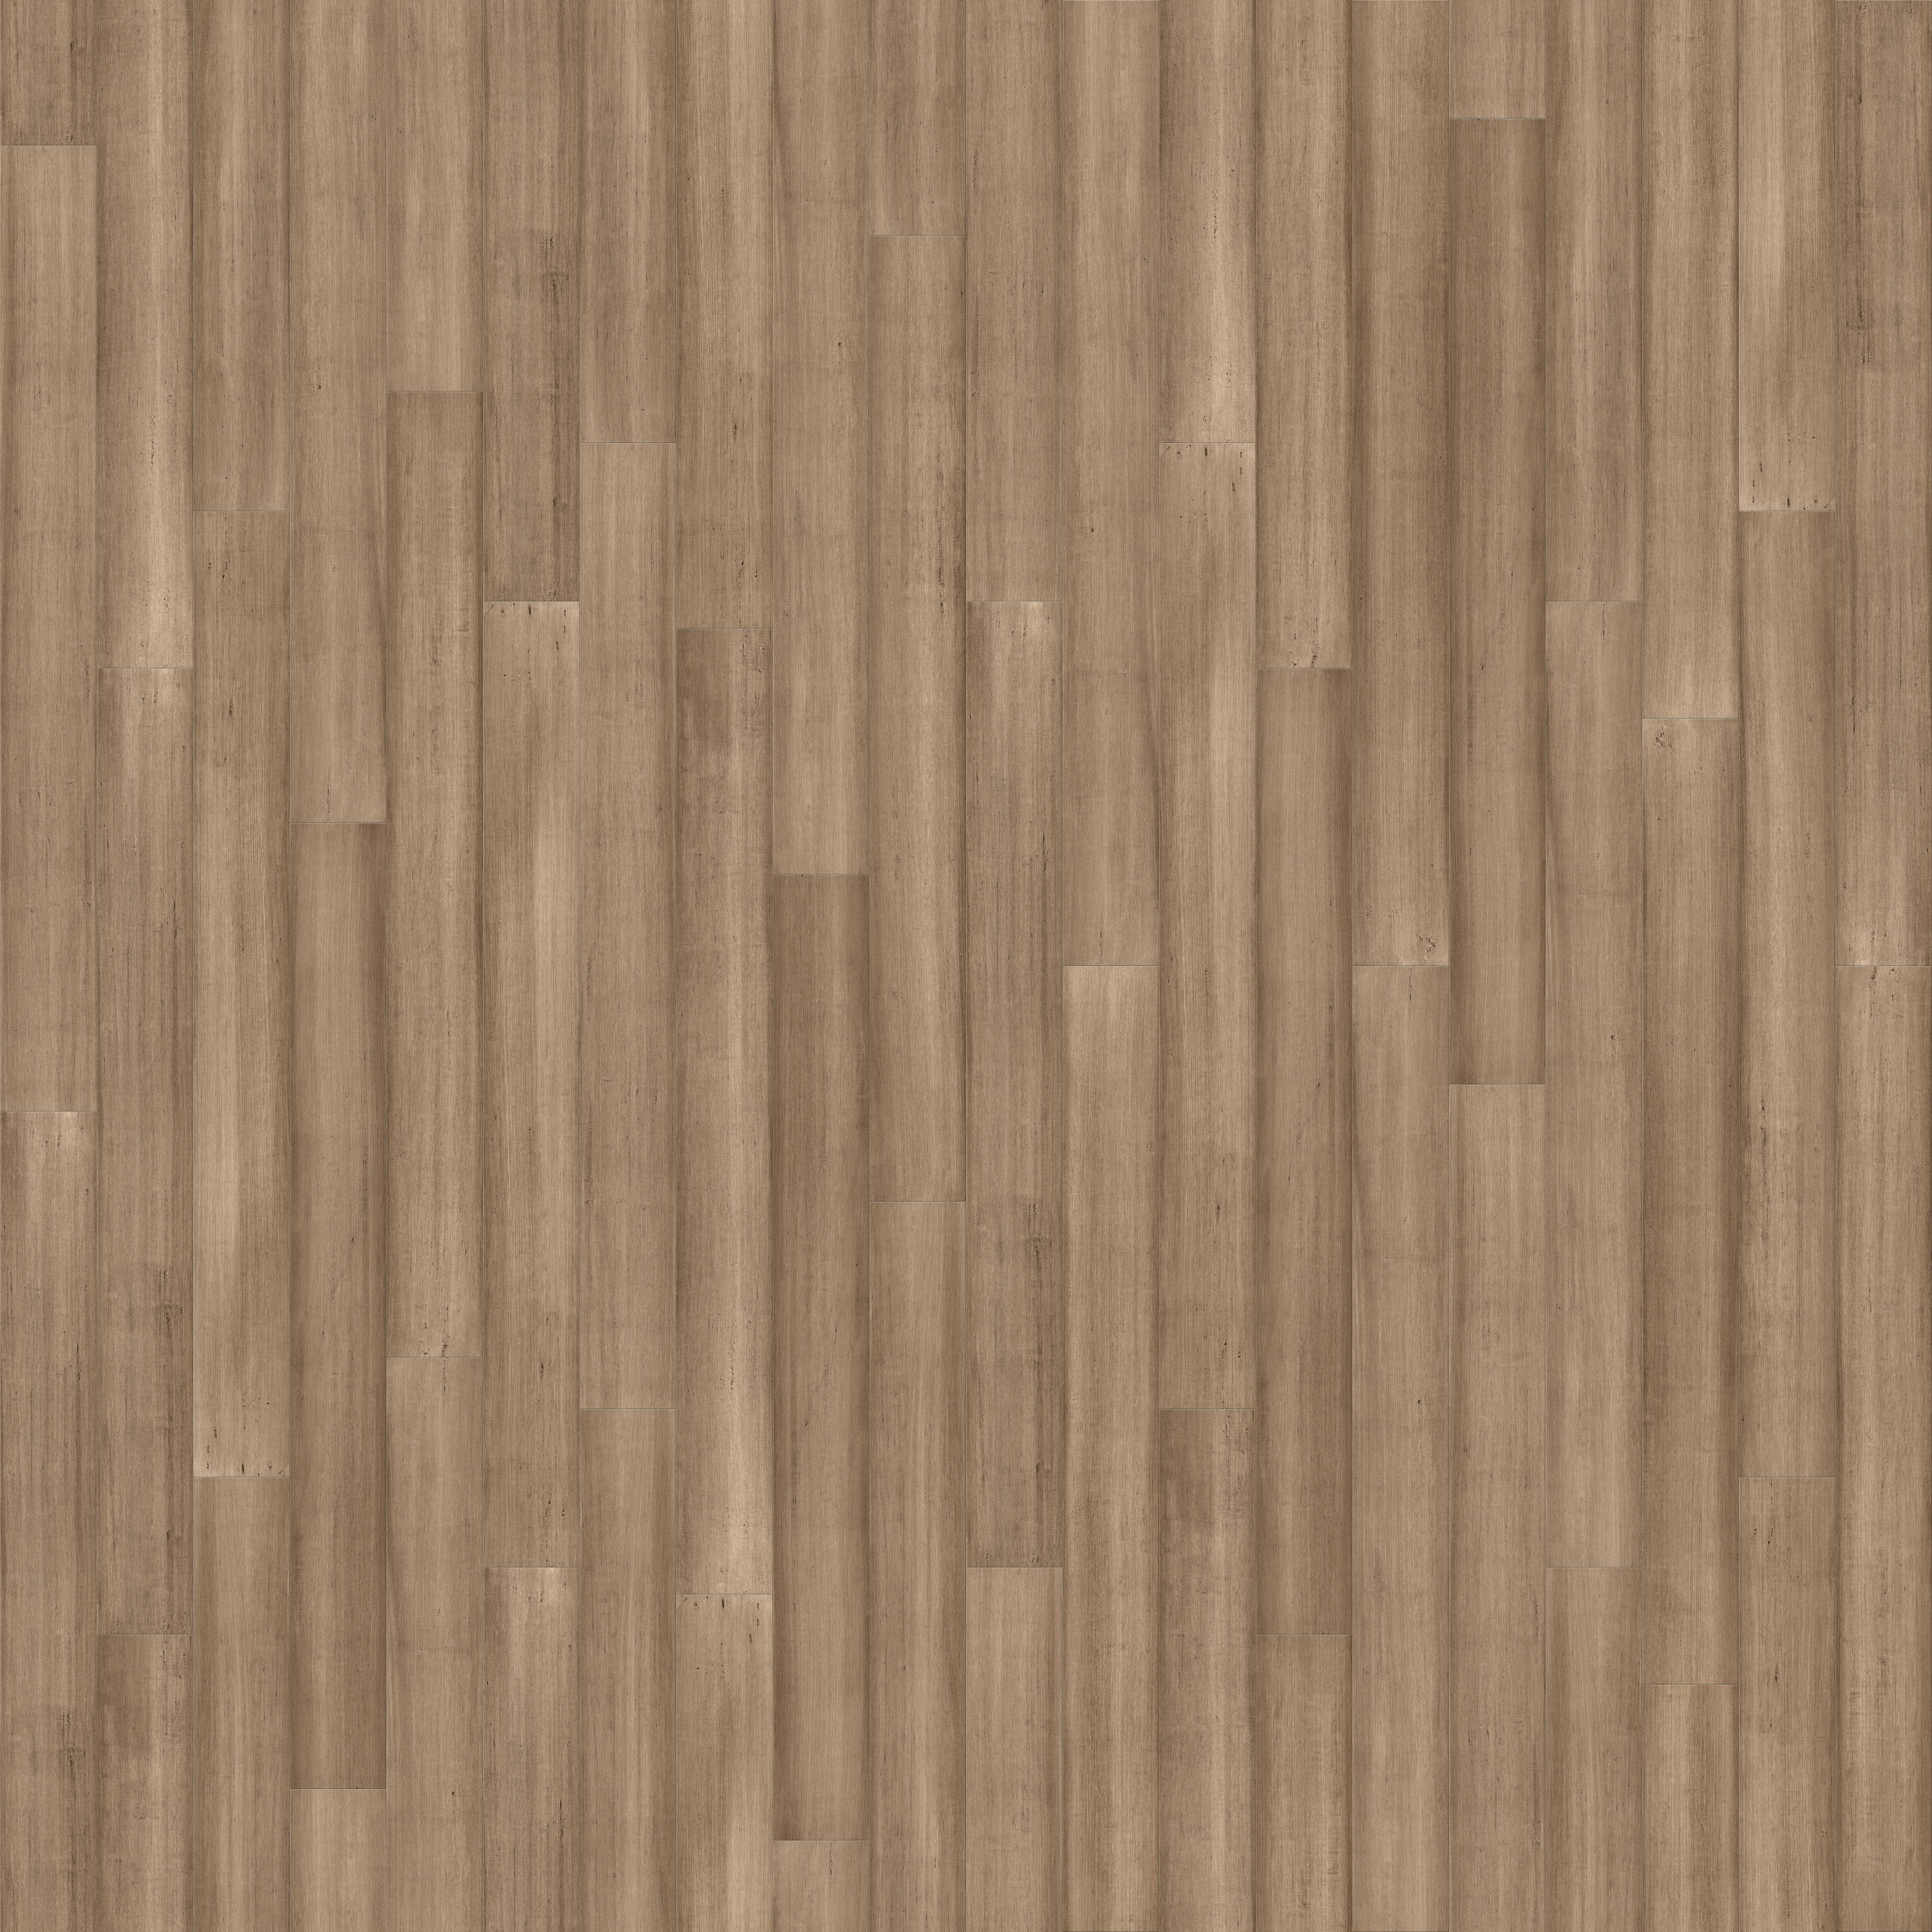 CALI Bamboo (Engineered) Channel Islands Bamboo 5-5/16-in W x 9/16-in T x 72-in Smooth/Traditional Engineered Hardwood Flooring (21.5-sq ft) in Brown -  7014009300